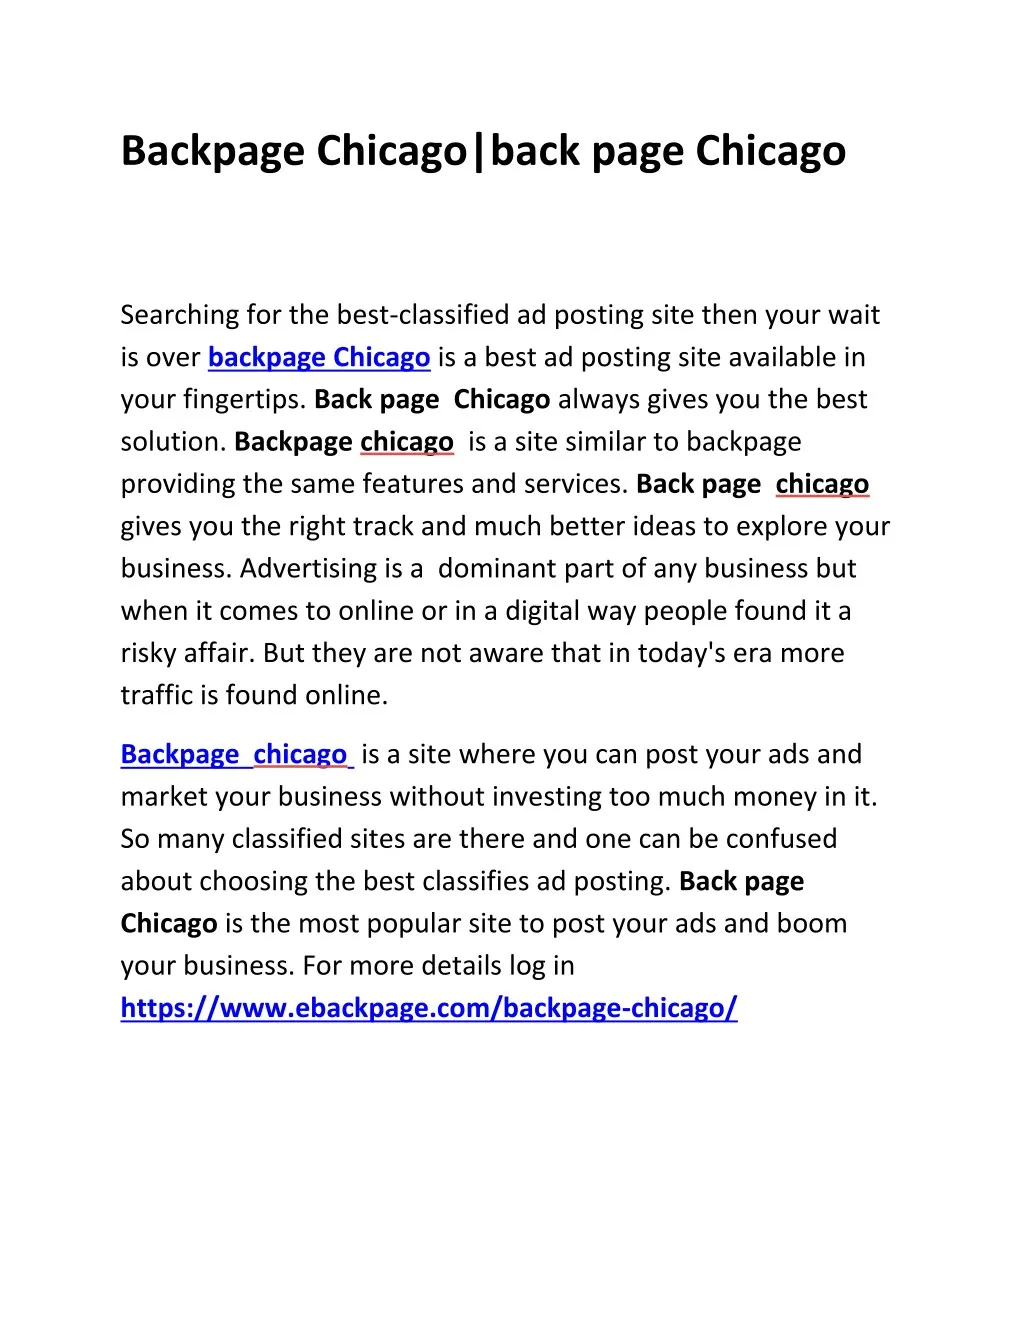 backpage chicago back page chicago